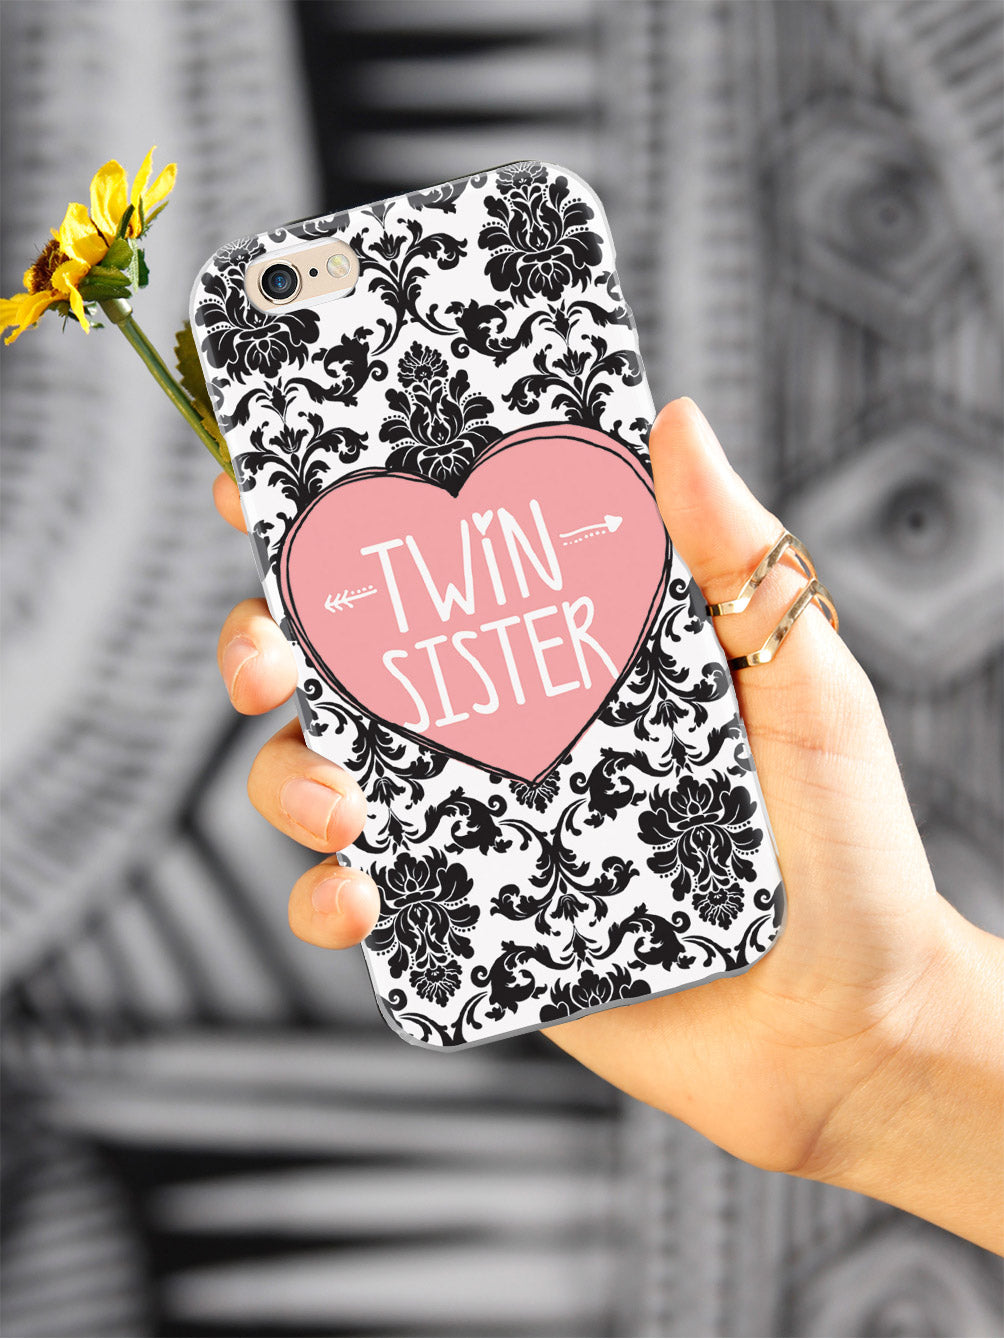 Sisterly Love - Twin Sister - Damask Case